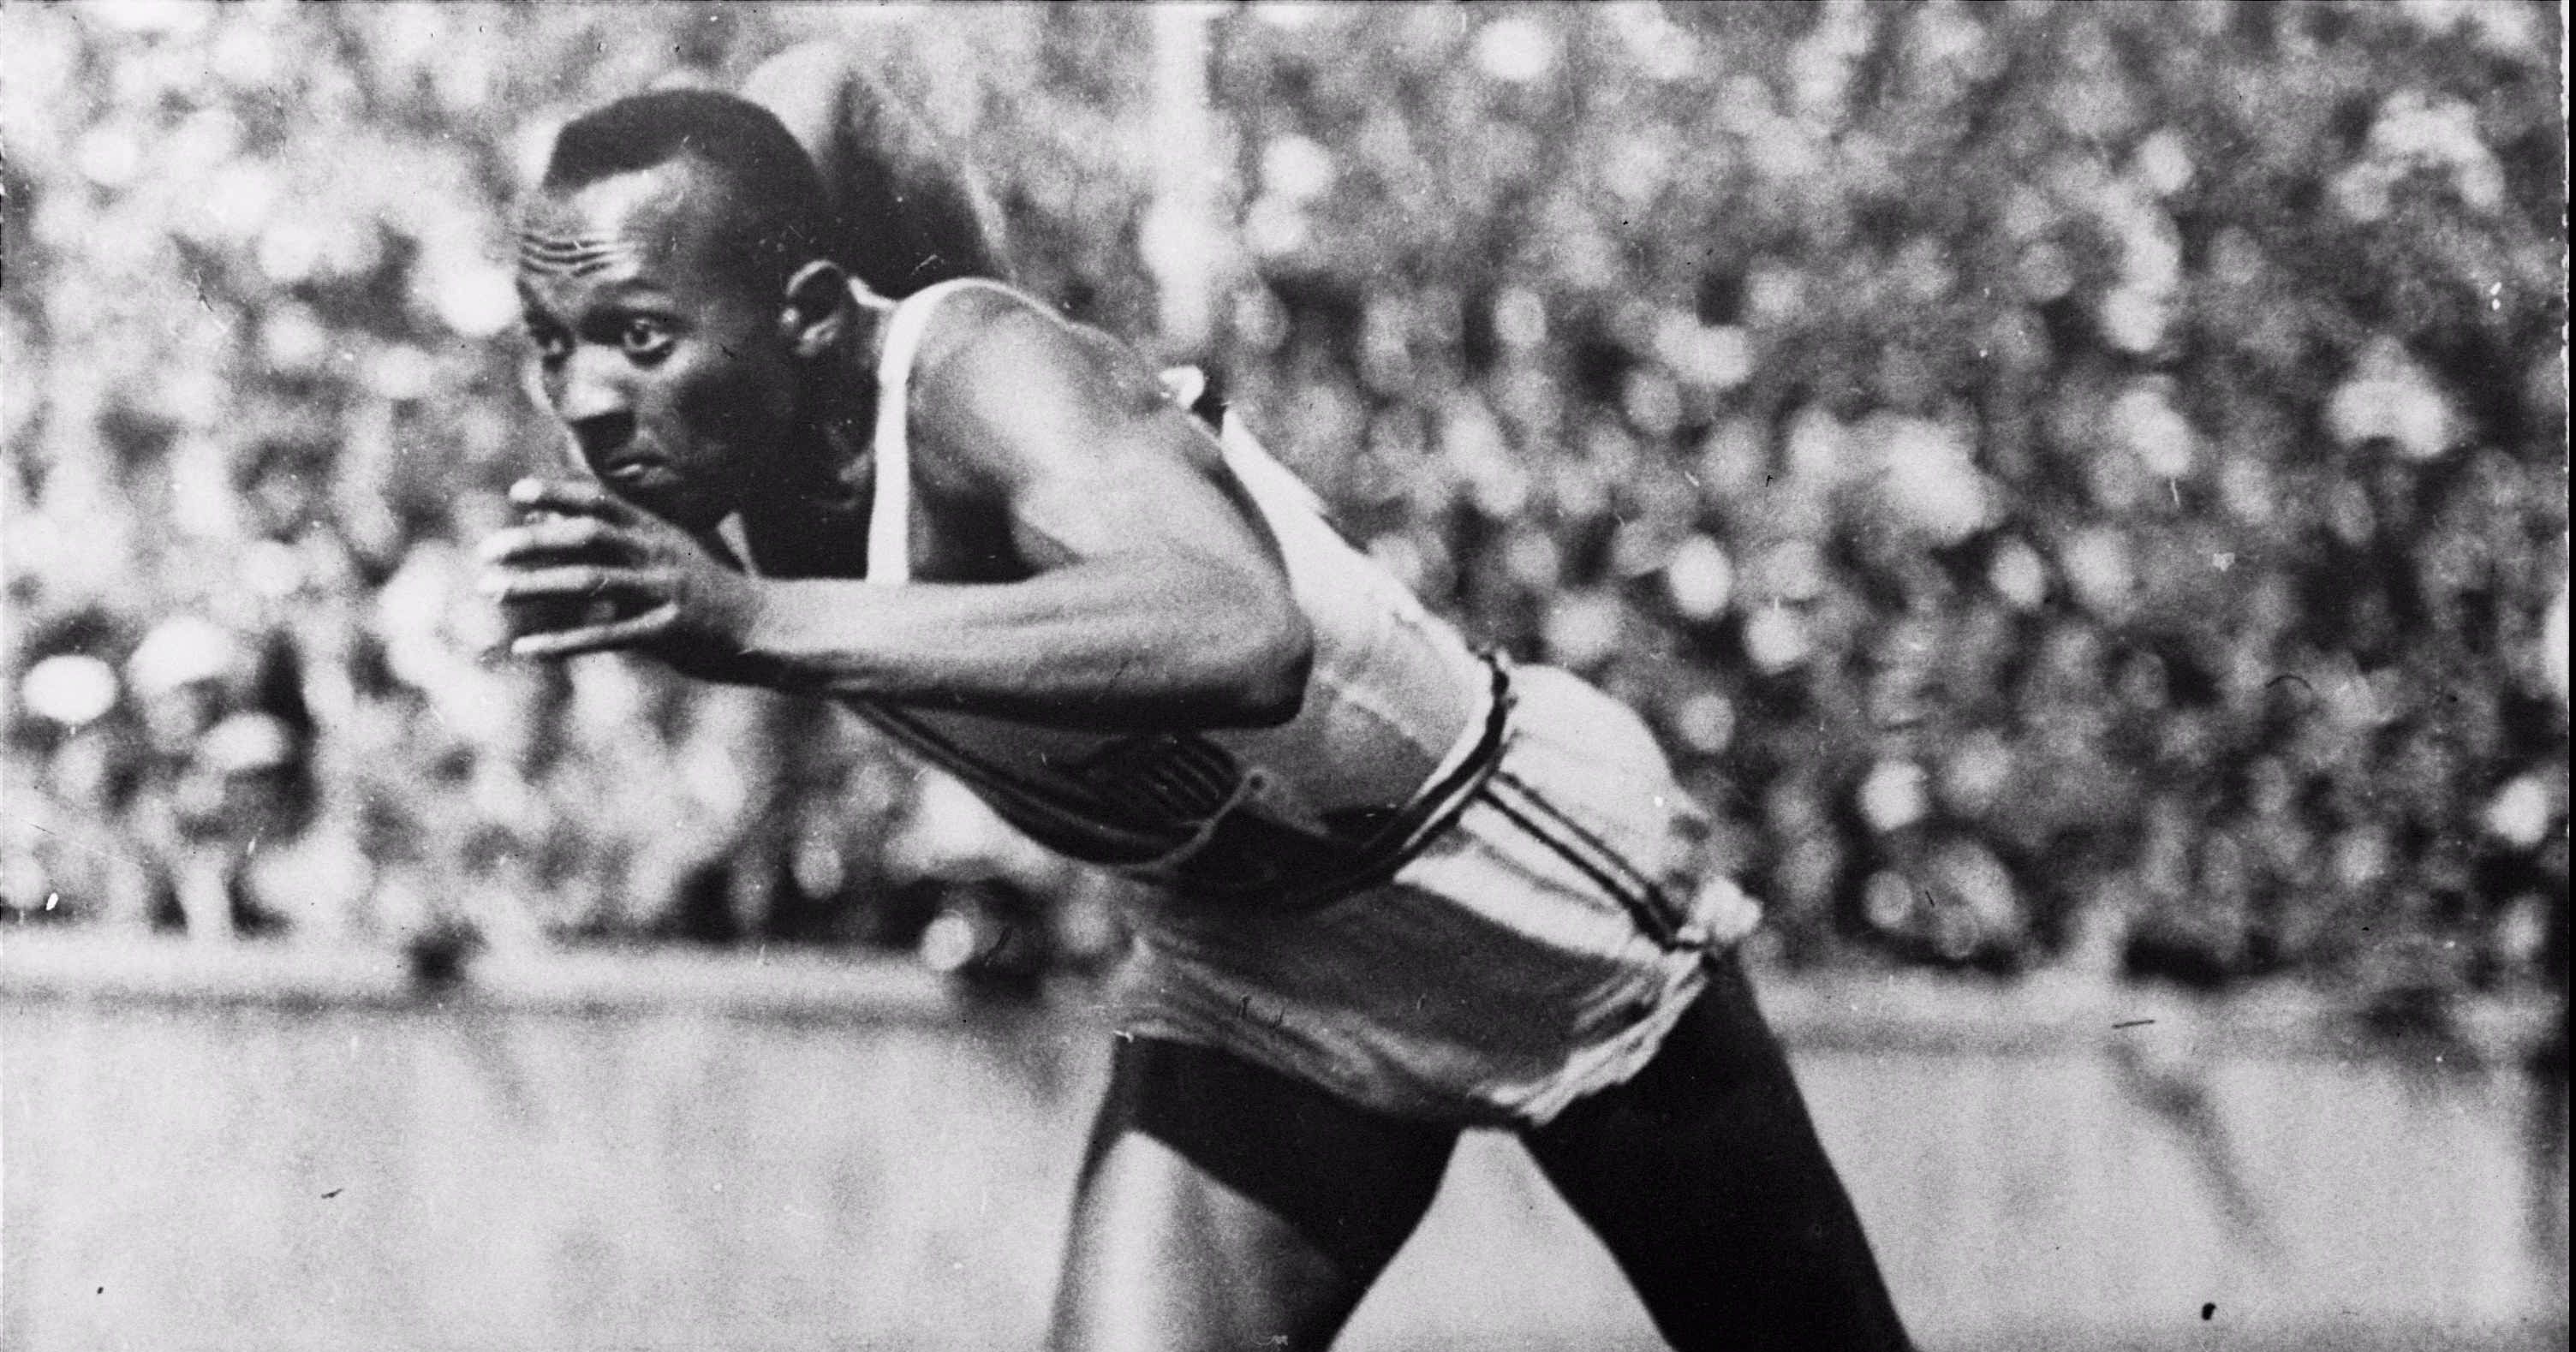 Remembering Jesse Owens, The Man Who Fought Racism And Defied Hitler To